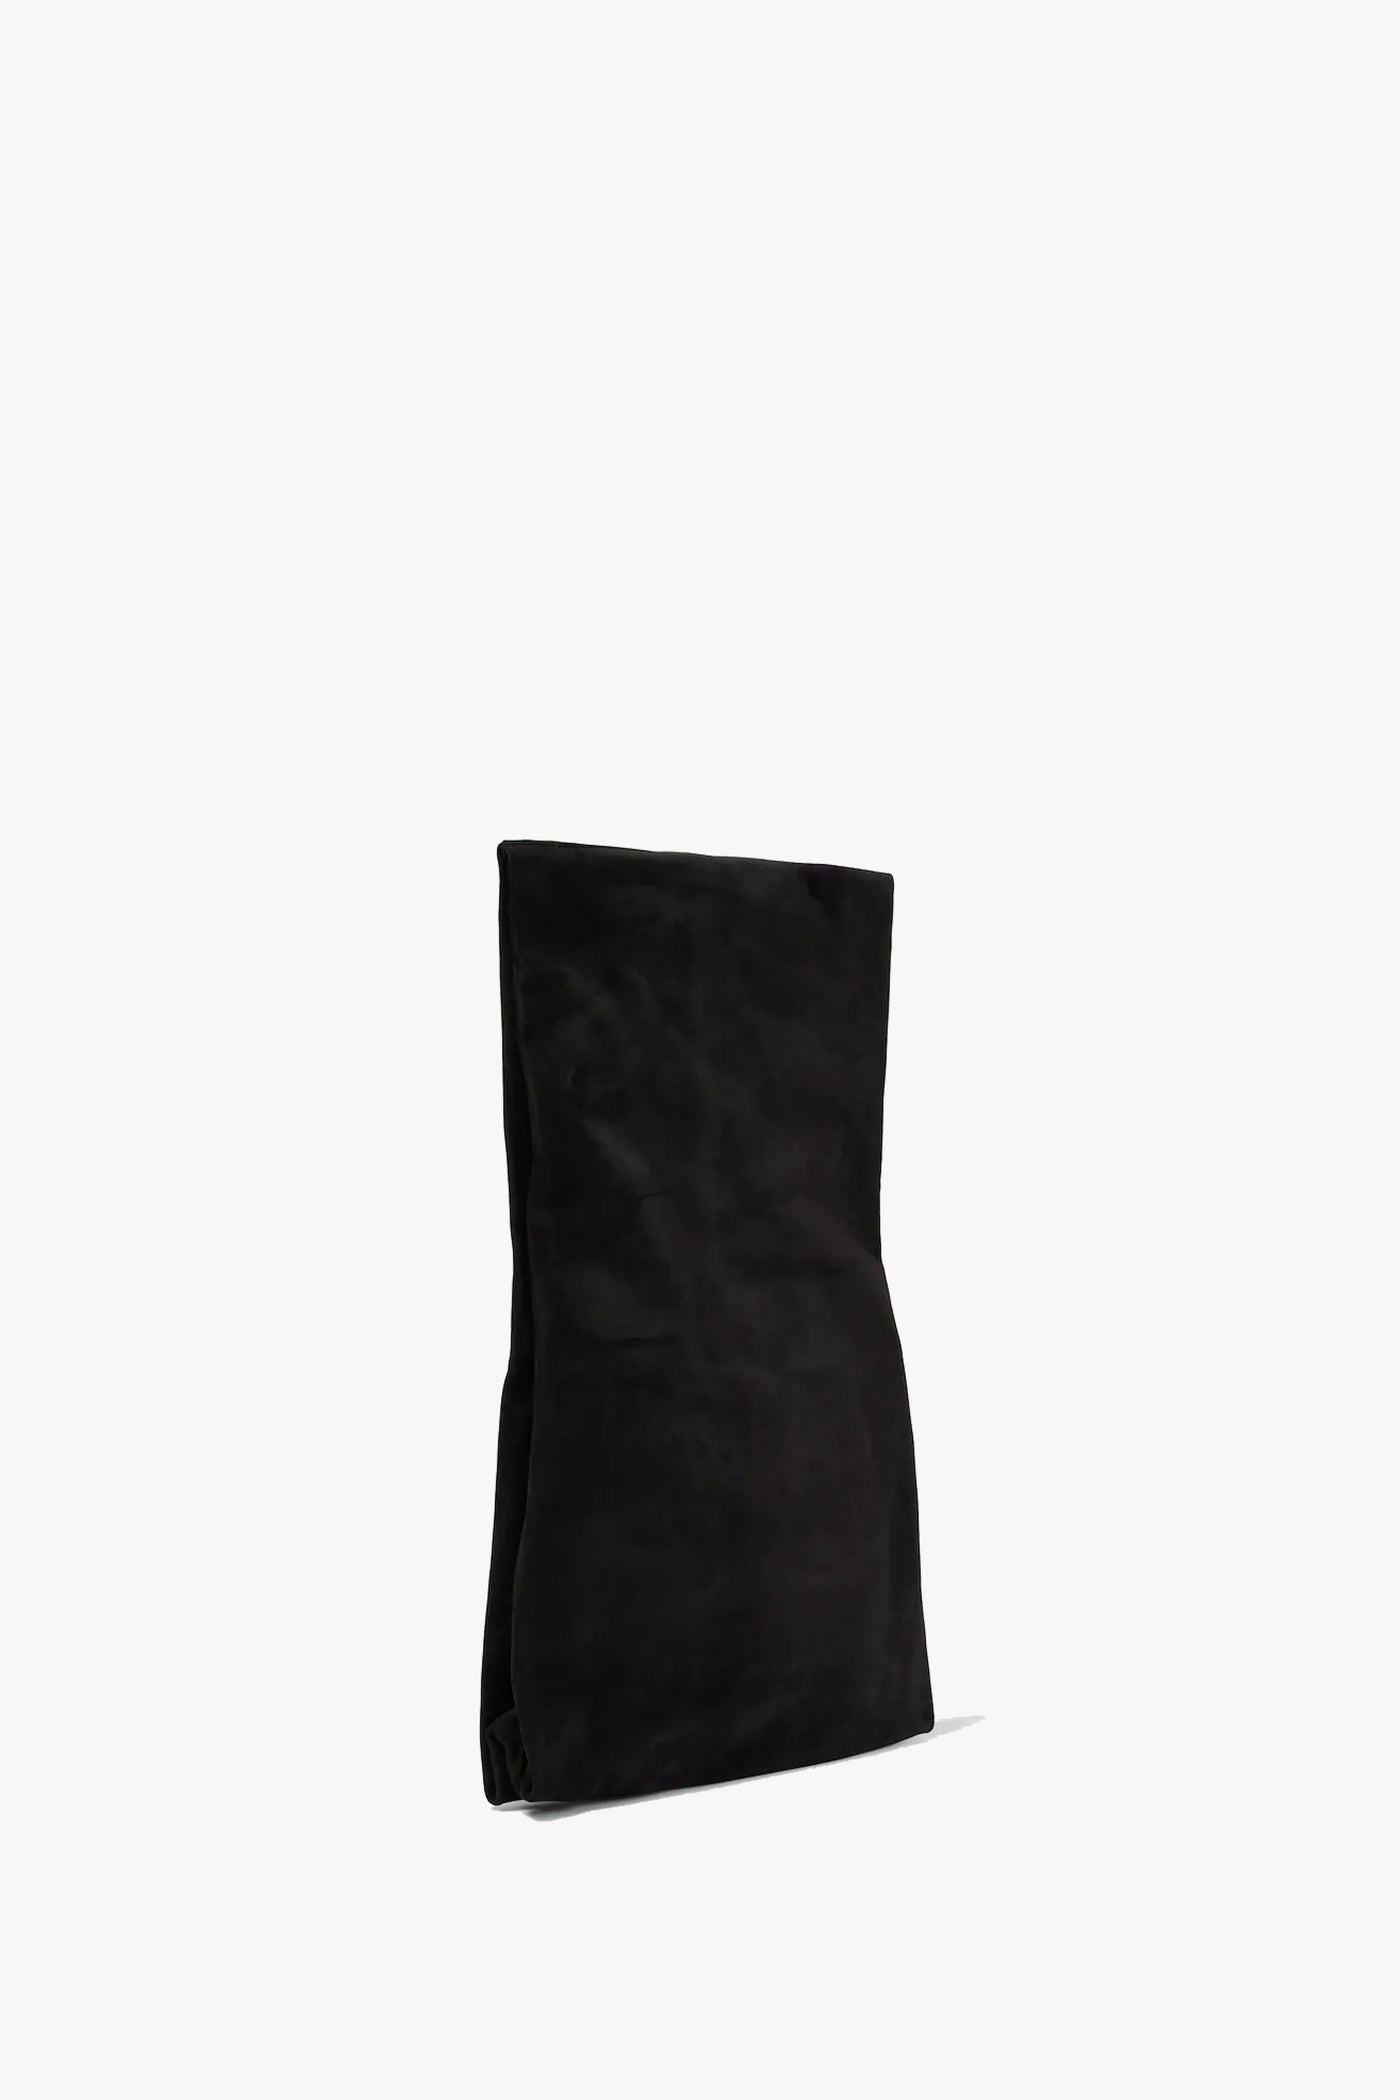 Small Glove Bag Black Suede